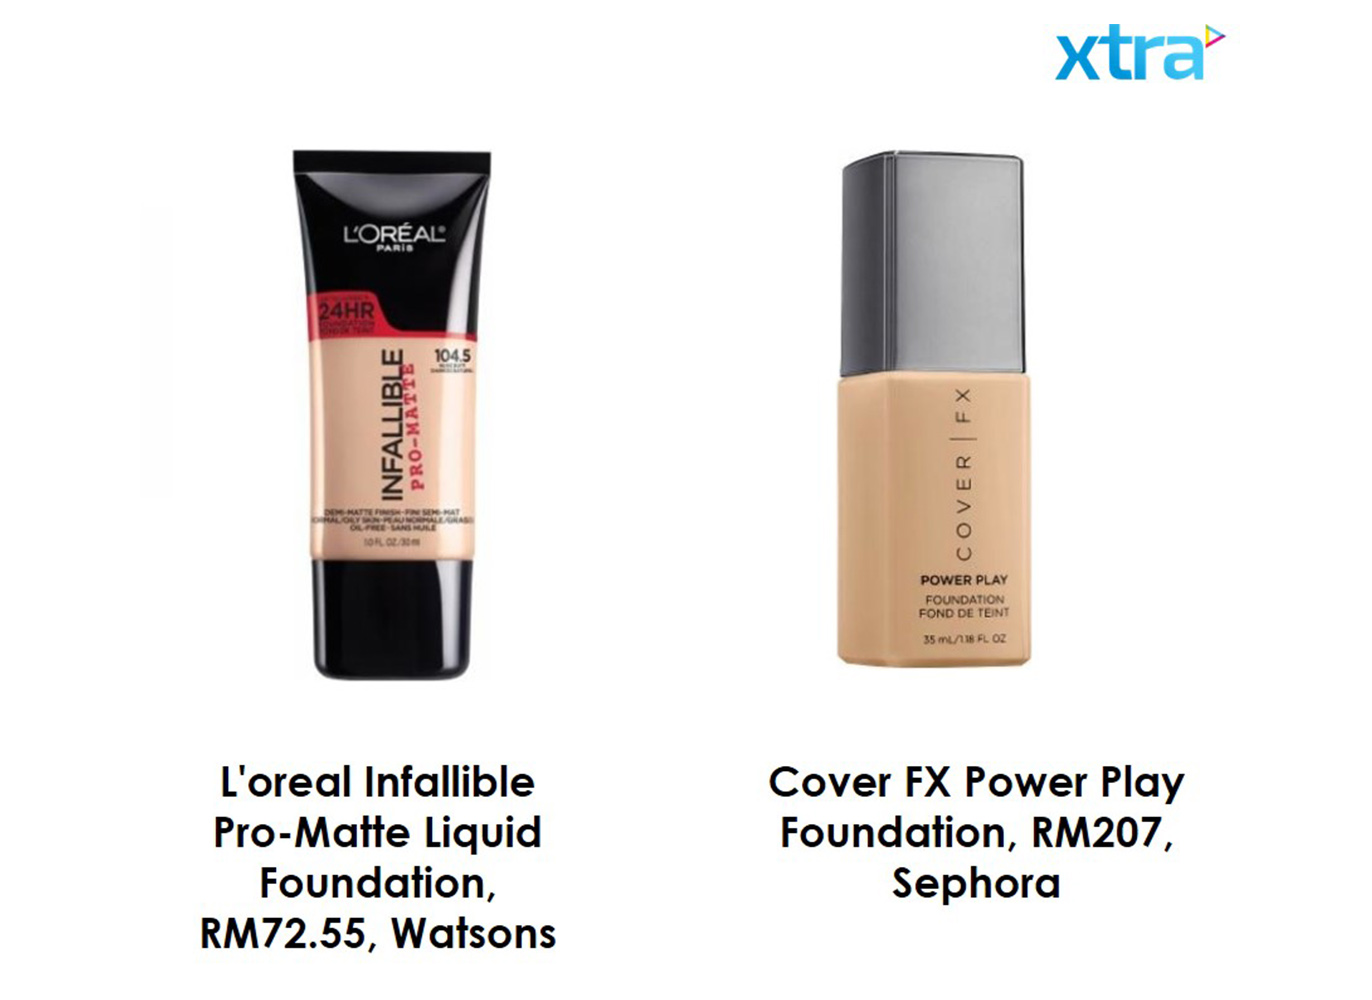 loreal infallible vs cover FX power play-1